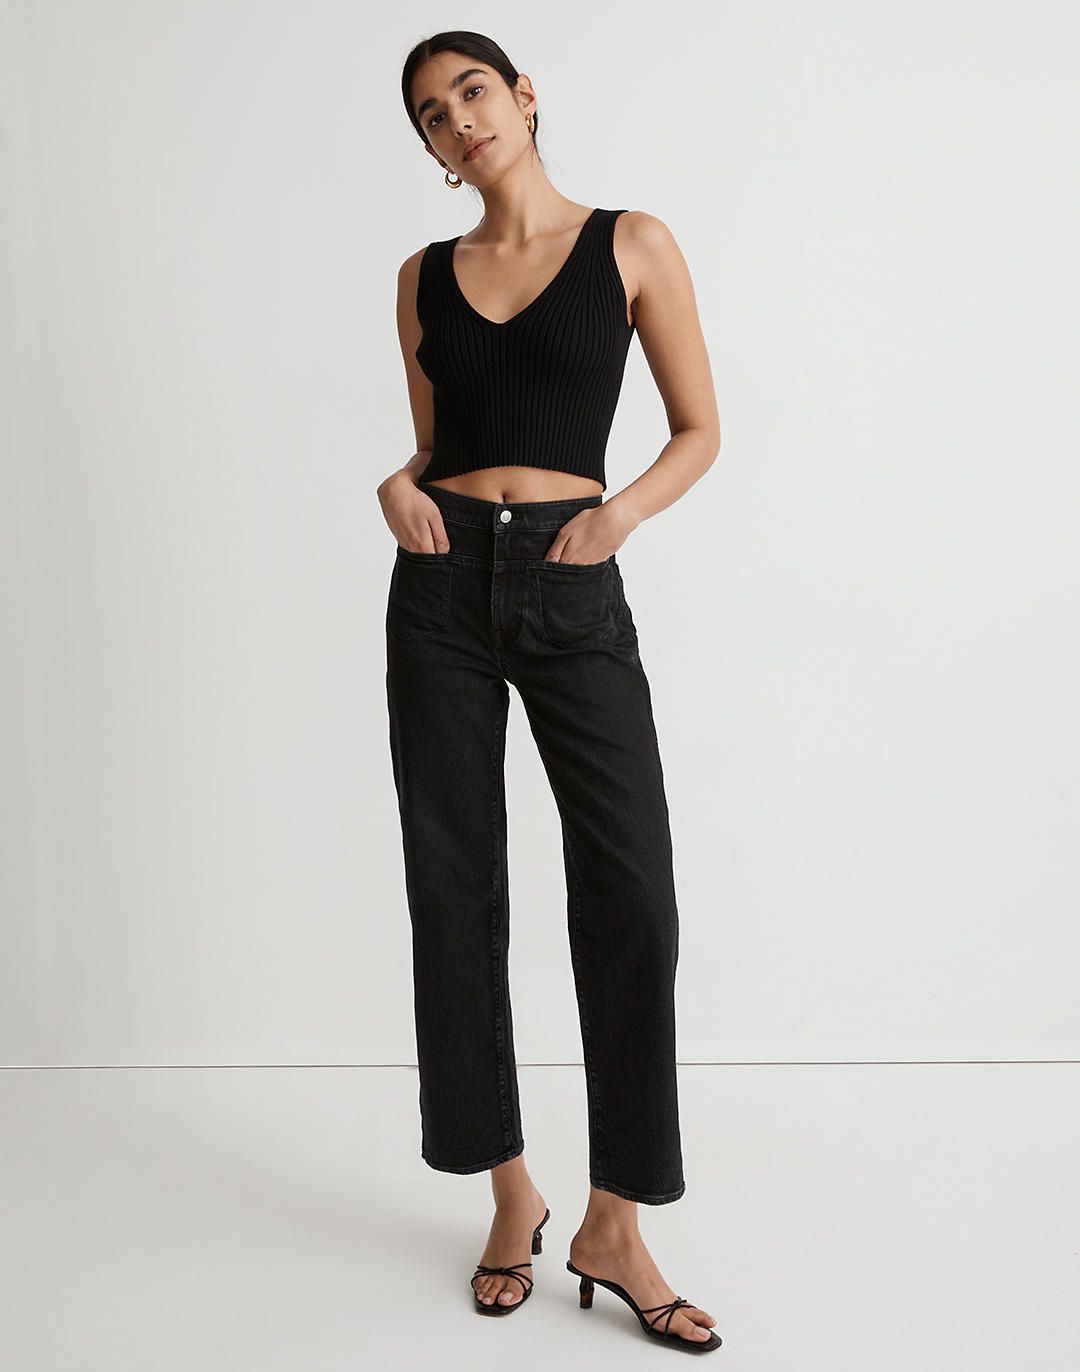 The Perfect Vintage Wide-Leg Crop Jean in Stone Black Wash | Madewell